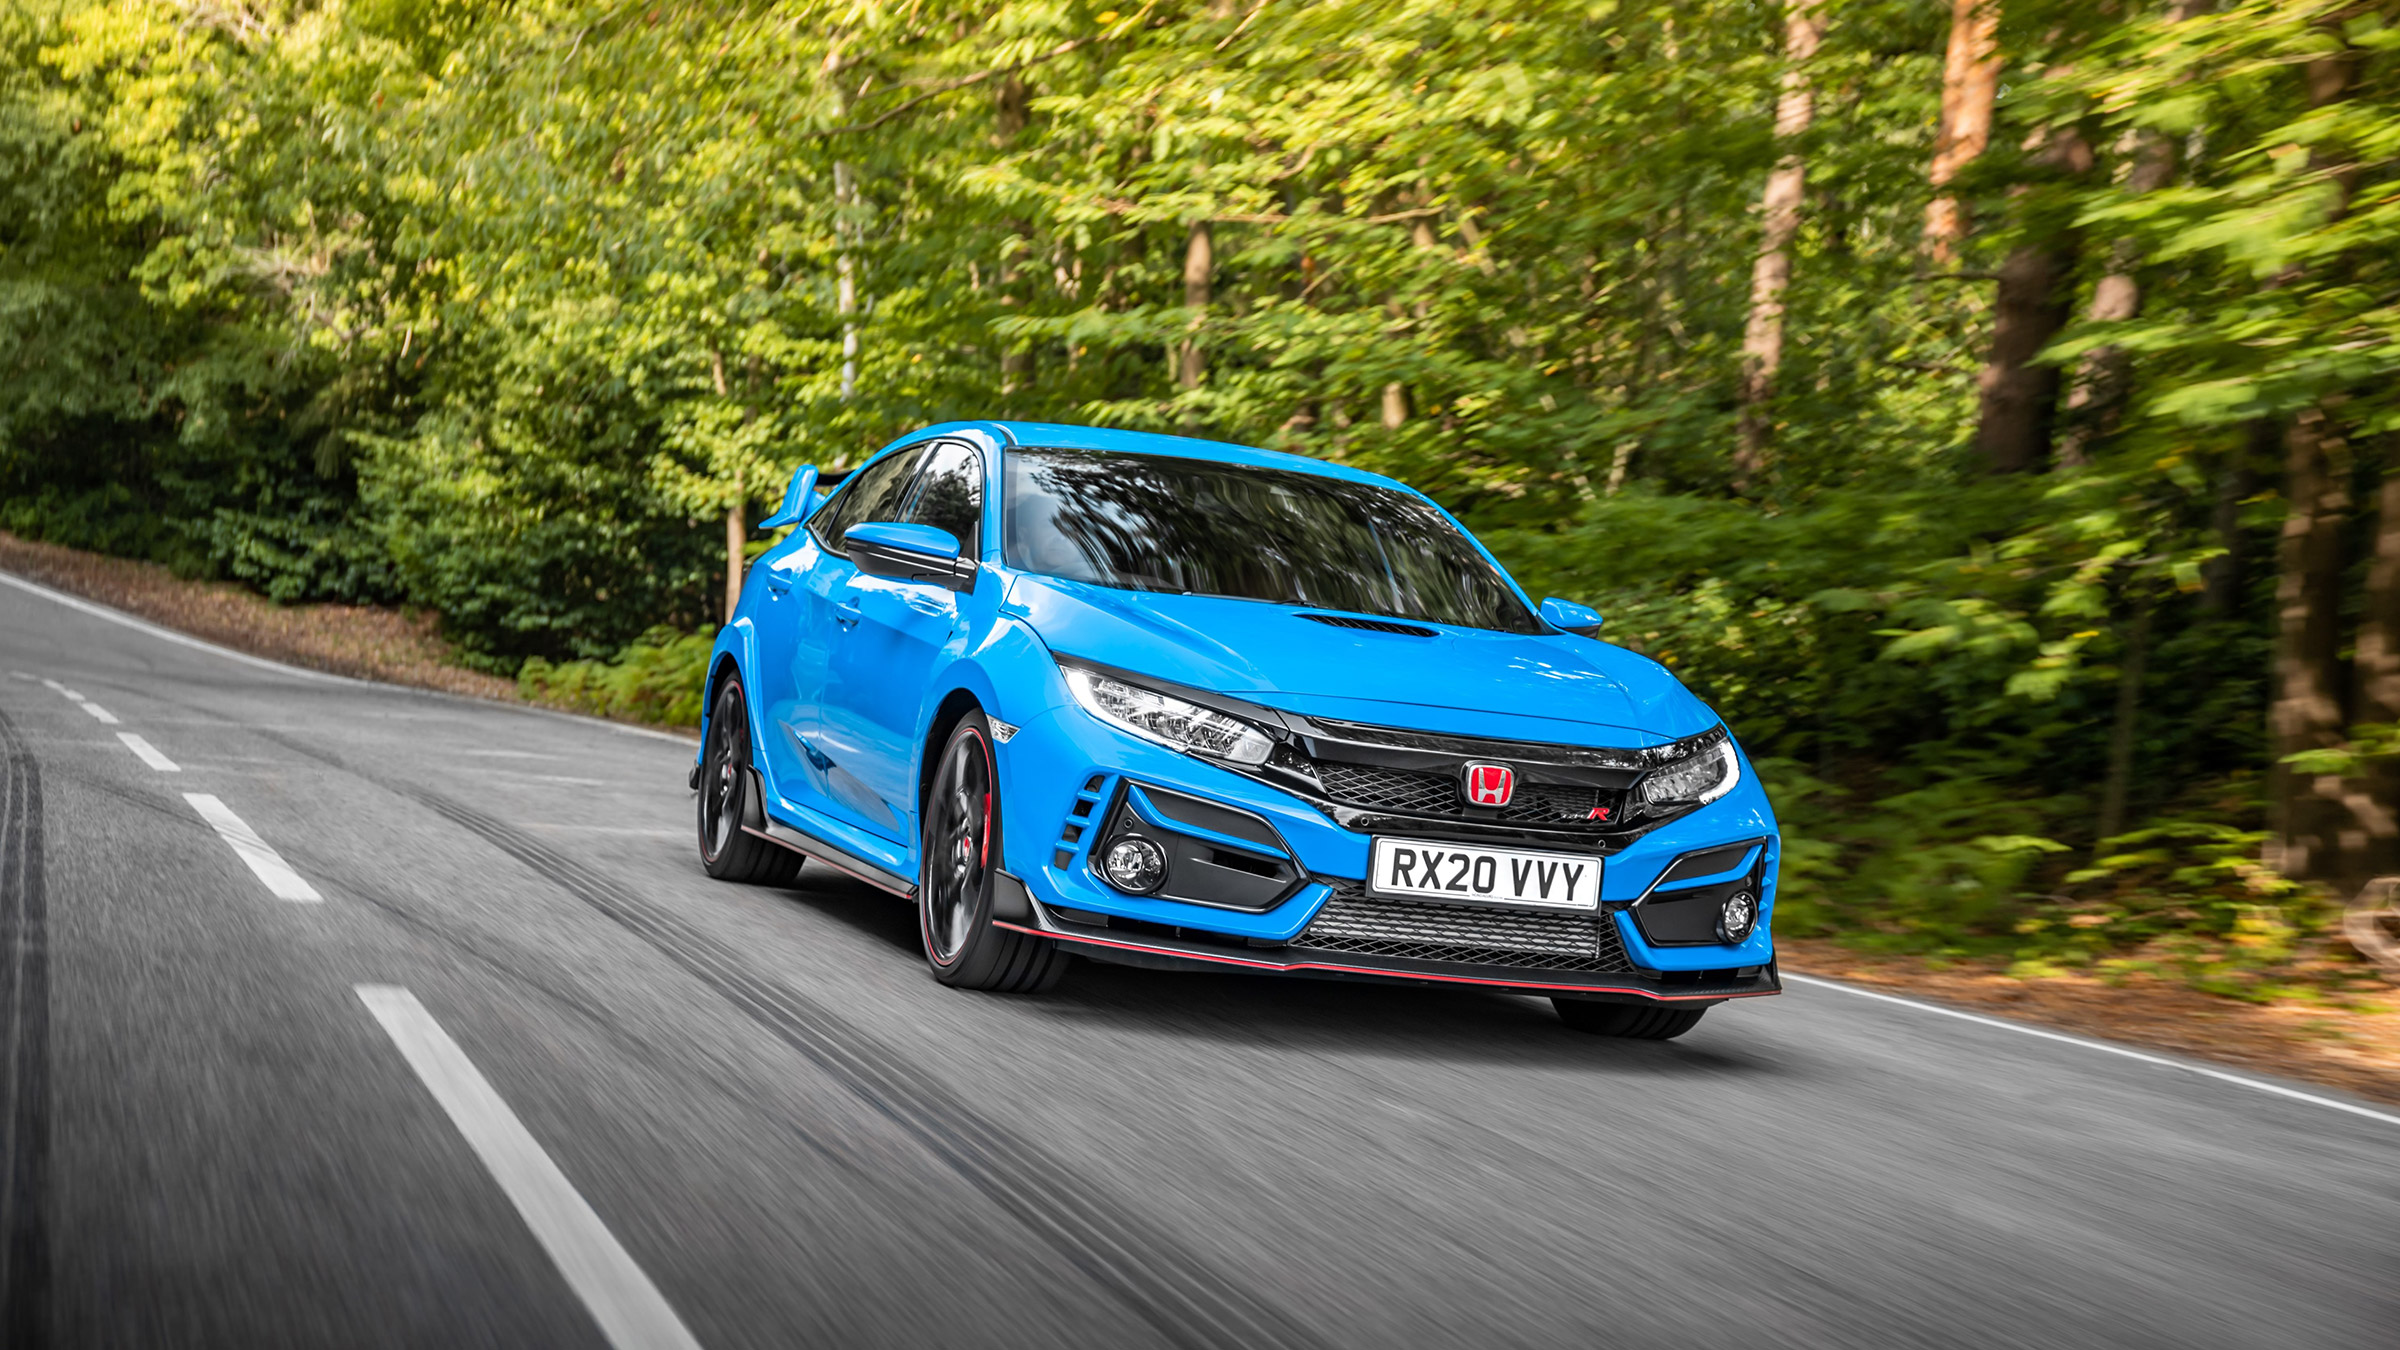 Honda Civic Type R (FL5) review: the undisputed king of hot